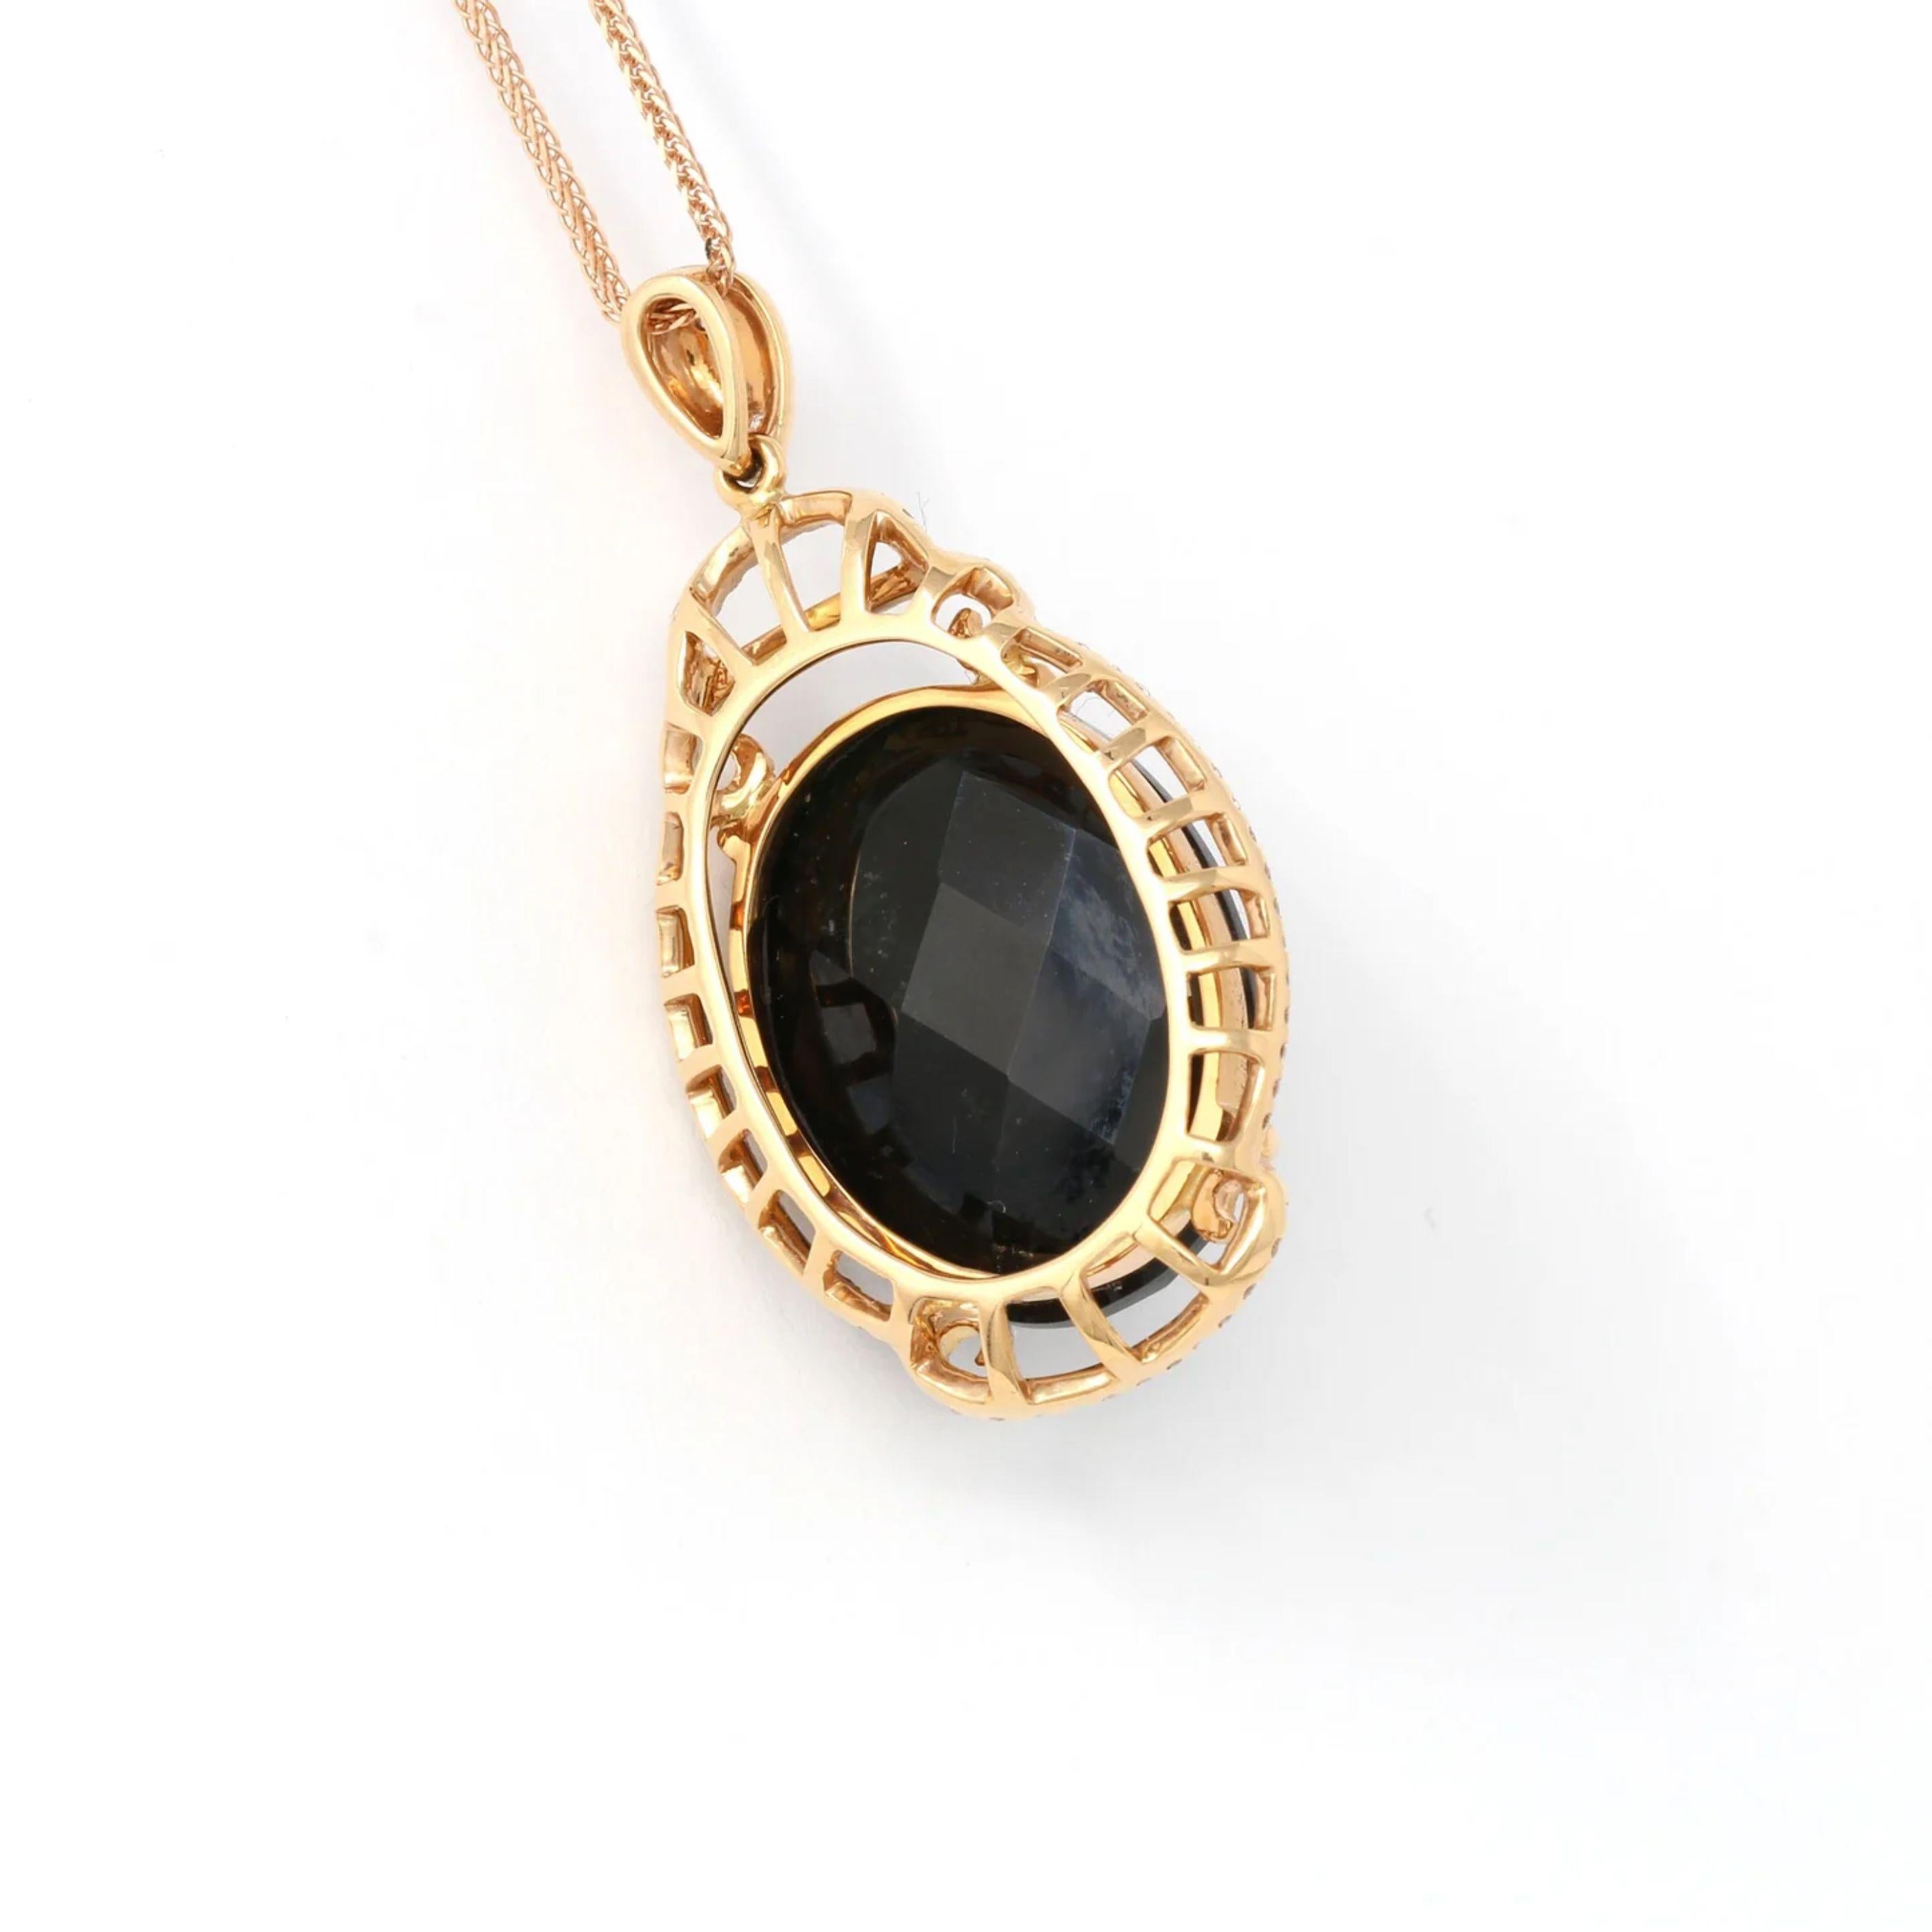 DESIGN CONCEPT--- This 18k rose gold necklace is made with high quality genuine black Burmese jadeite that is truly one of a kind. 27 ct of rich, black color with the magical property of black jade which shows green under the light. The design was a